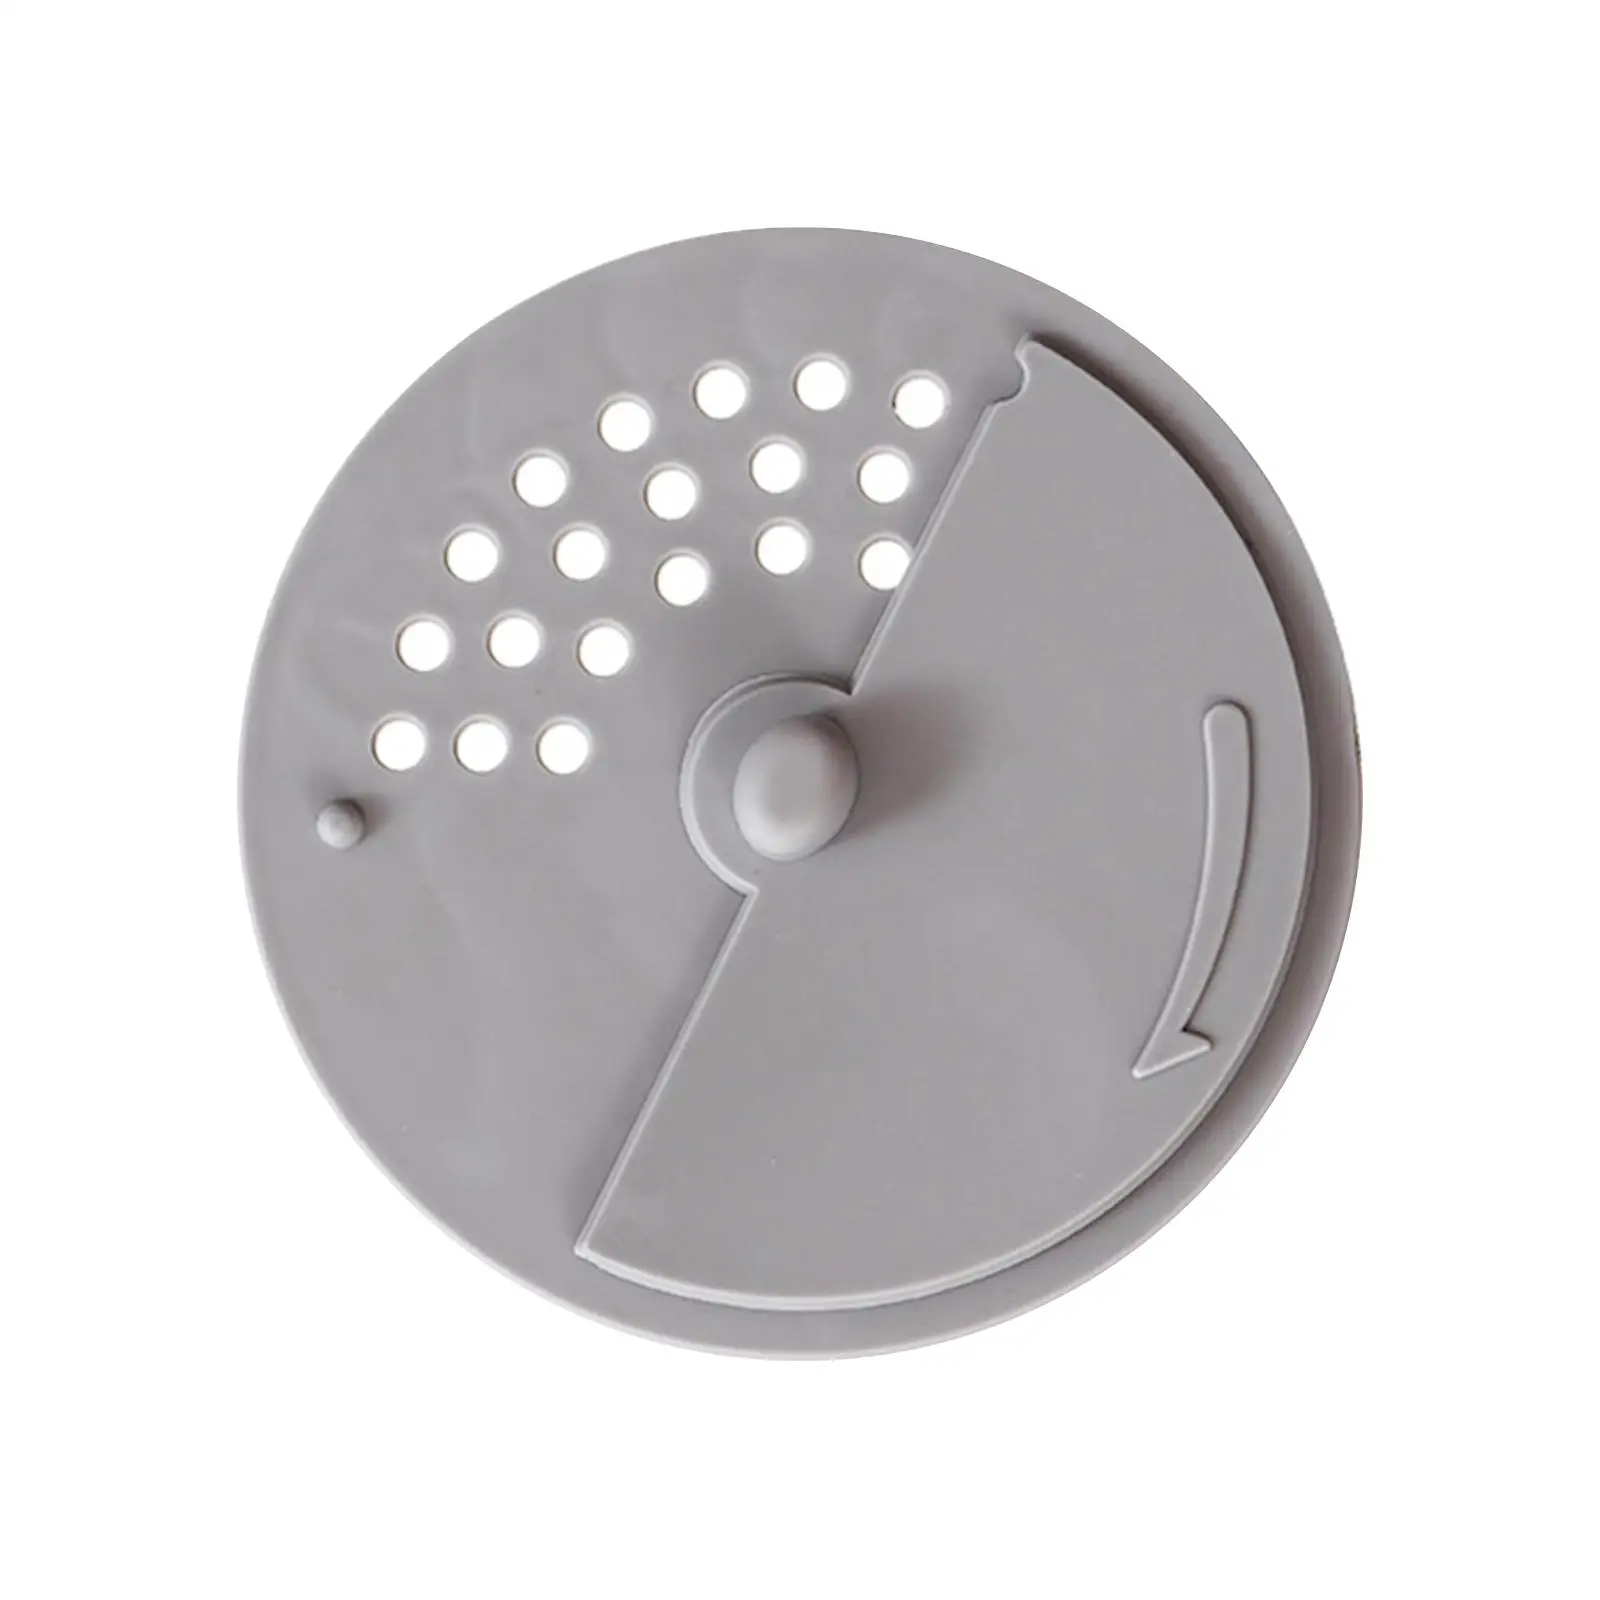 Floor Drain Cover Practical Reusable Durable Anti Blocking Sink Drain Strainer Waste Filter for Dormitory Bathroom Household